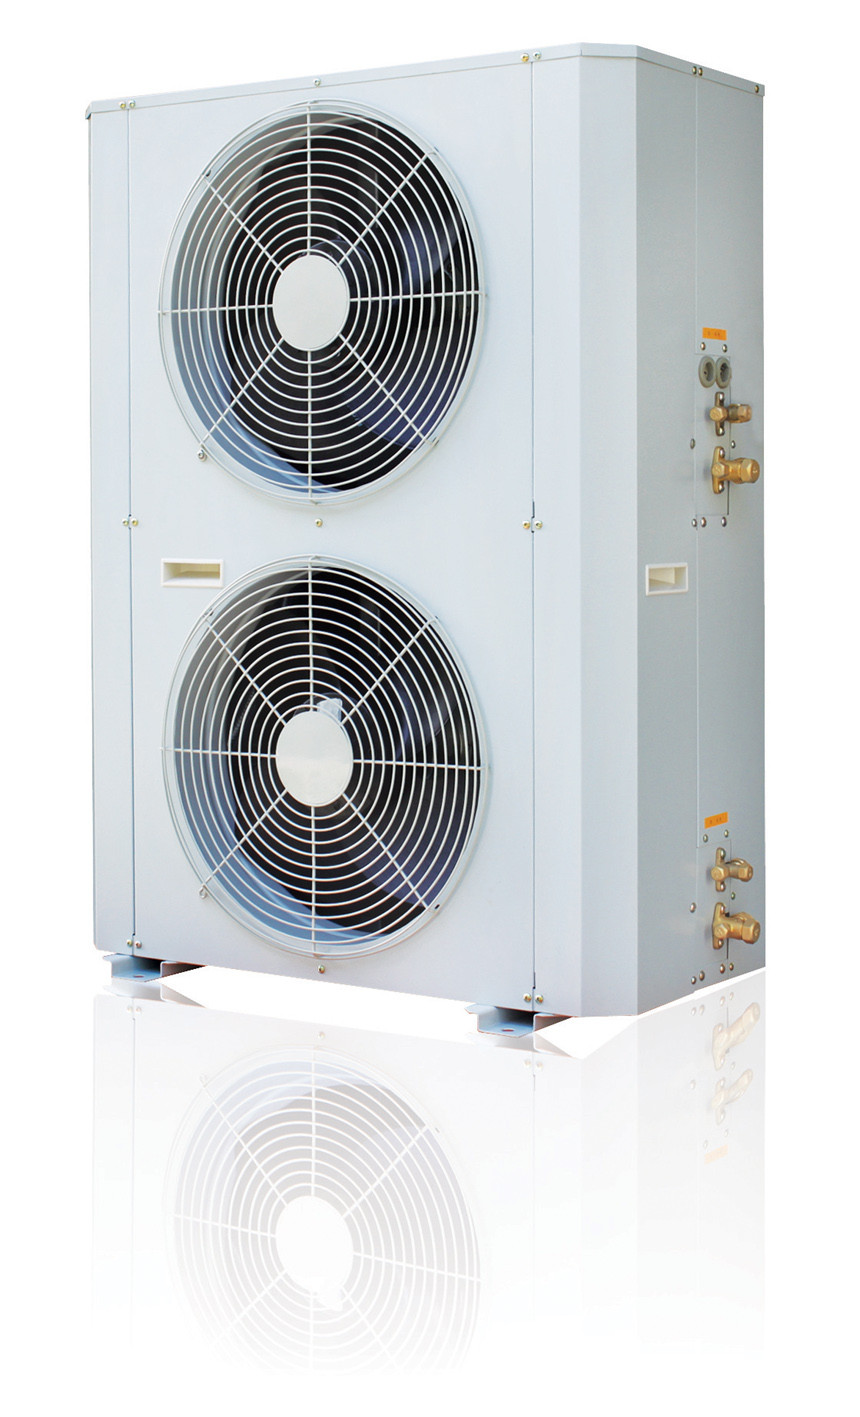 11.5kW Cold / Hot Water Integrated Air Cooled Modular Chiller R22 Heat Pump Unit